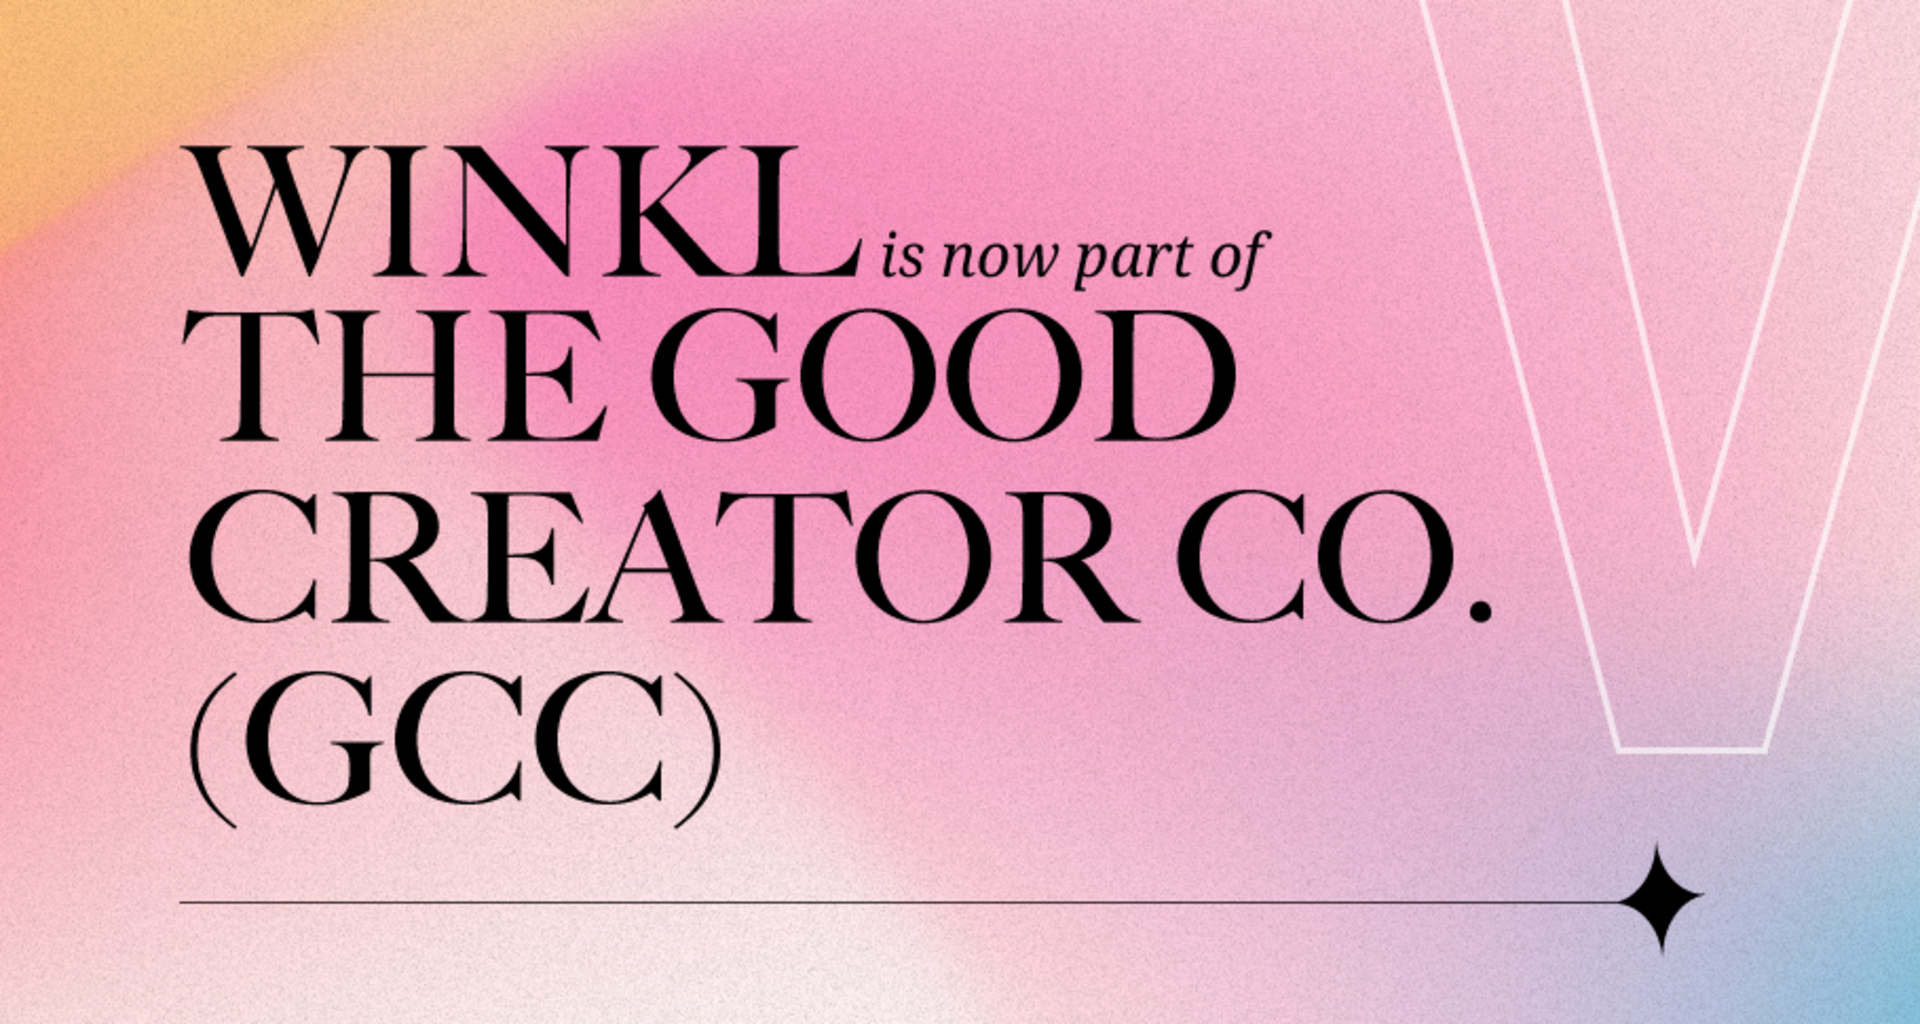 Here’s why Winkl is now a part of The Good Creator Co. image